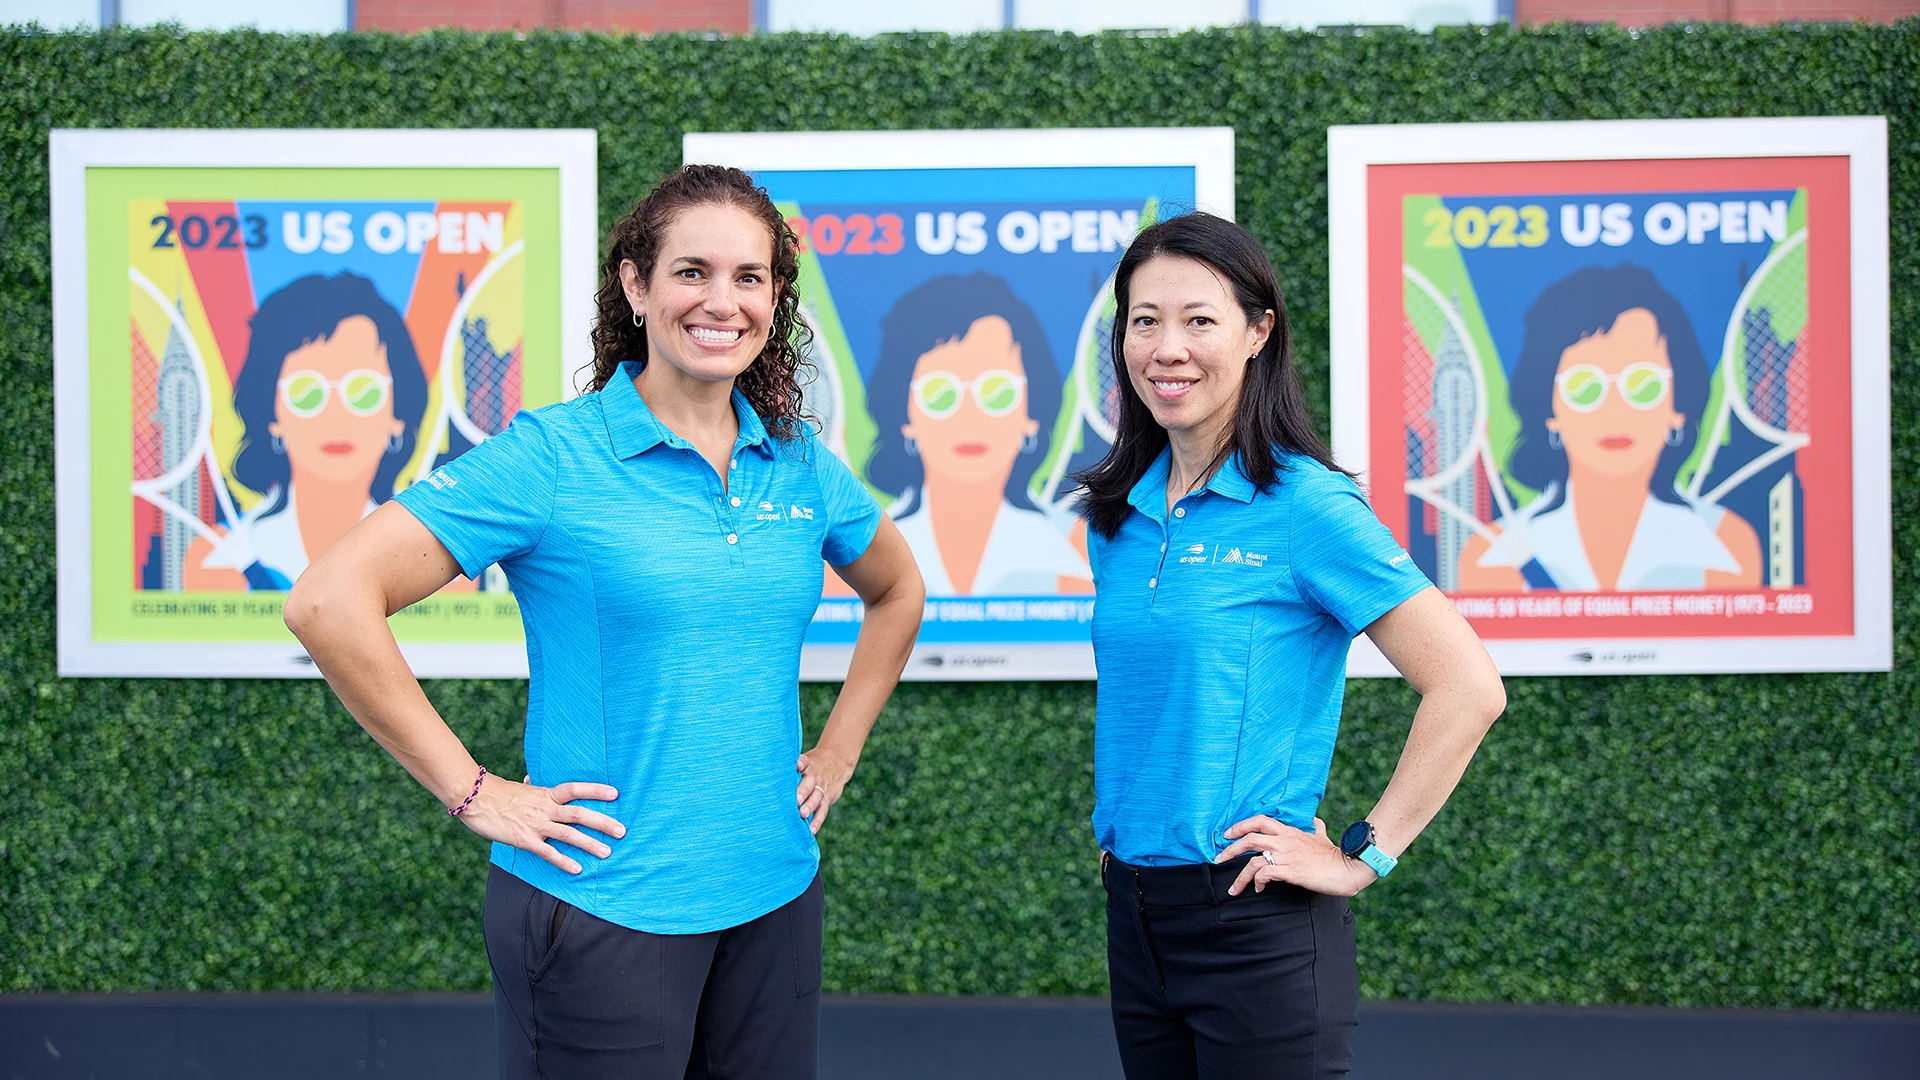 Melissa Leber, MD, left, with Alexis Colvin, MD, at the 2023 US Open Tennis Championships in Queens, New York.